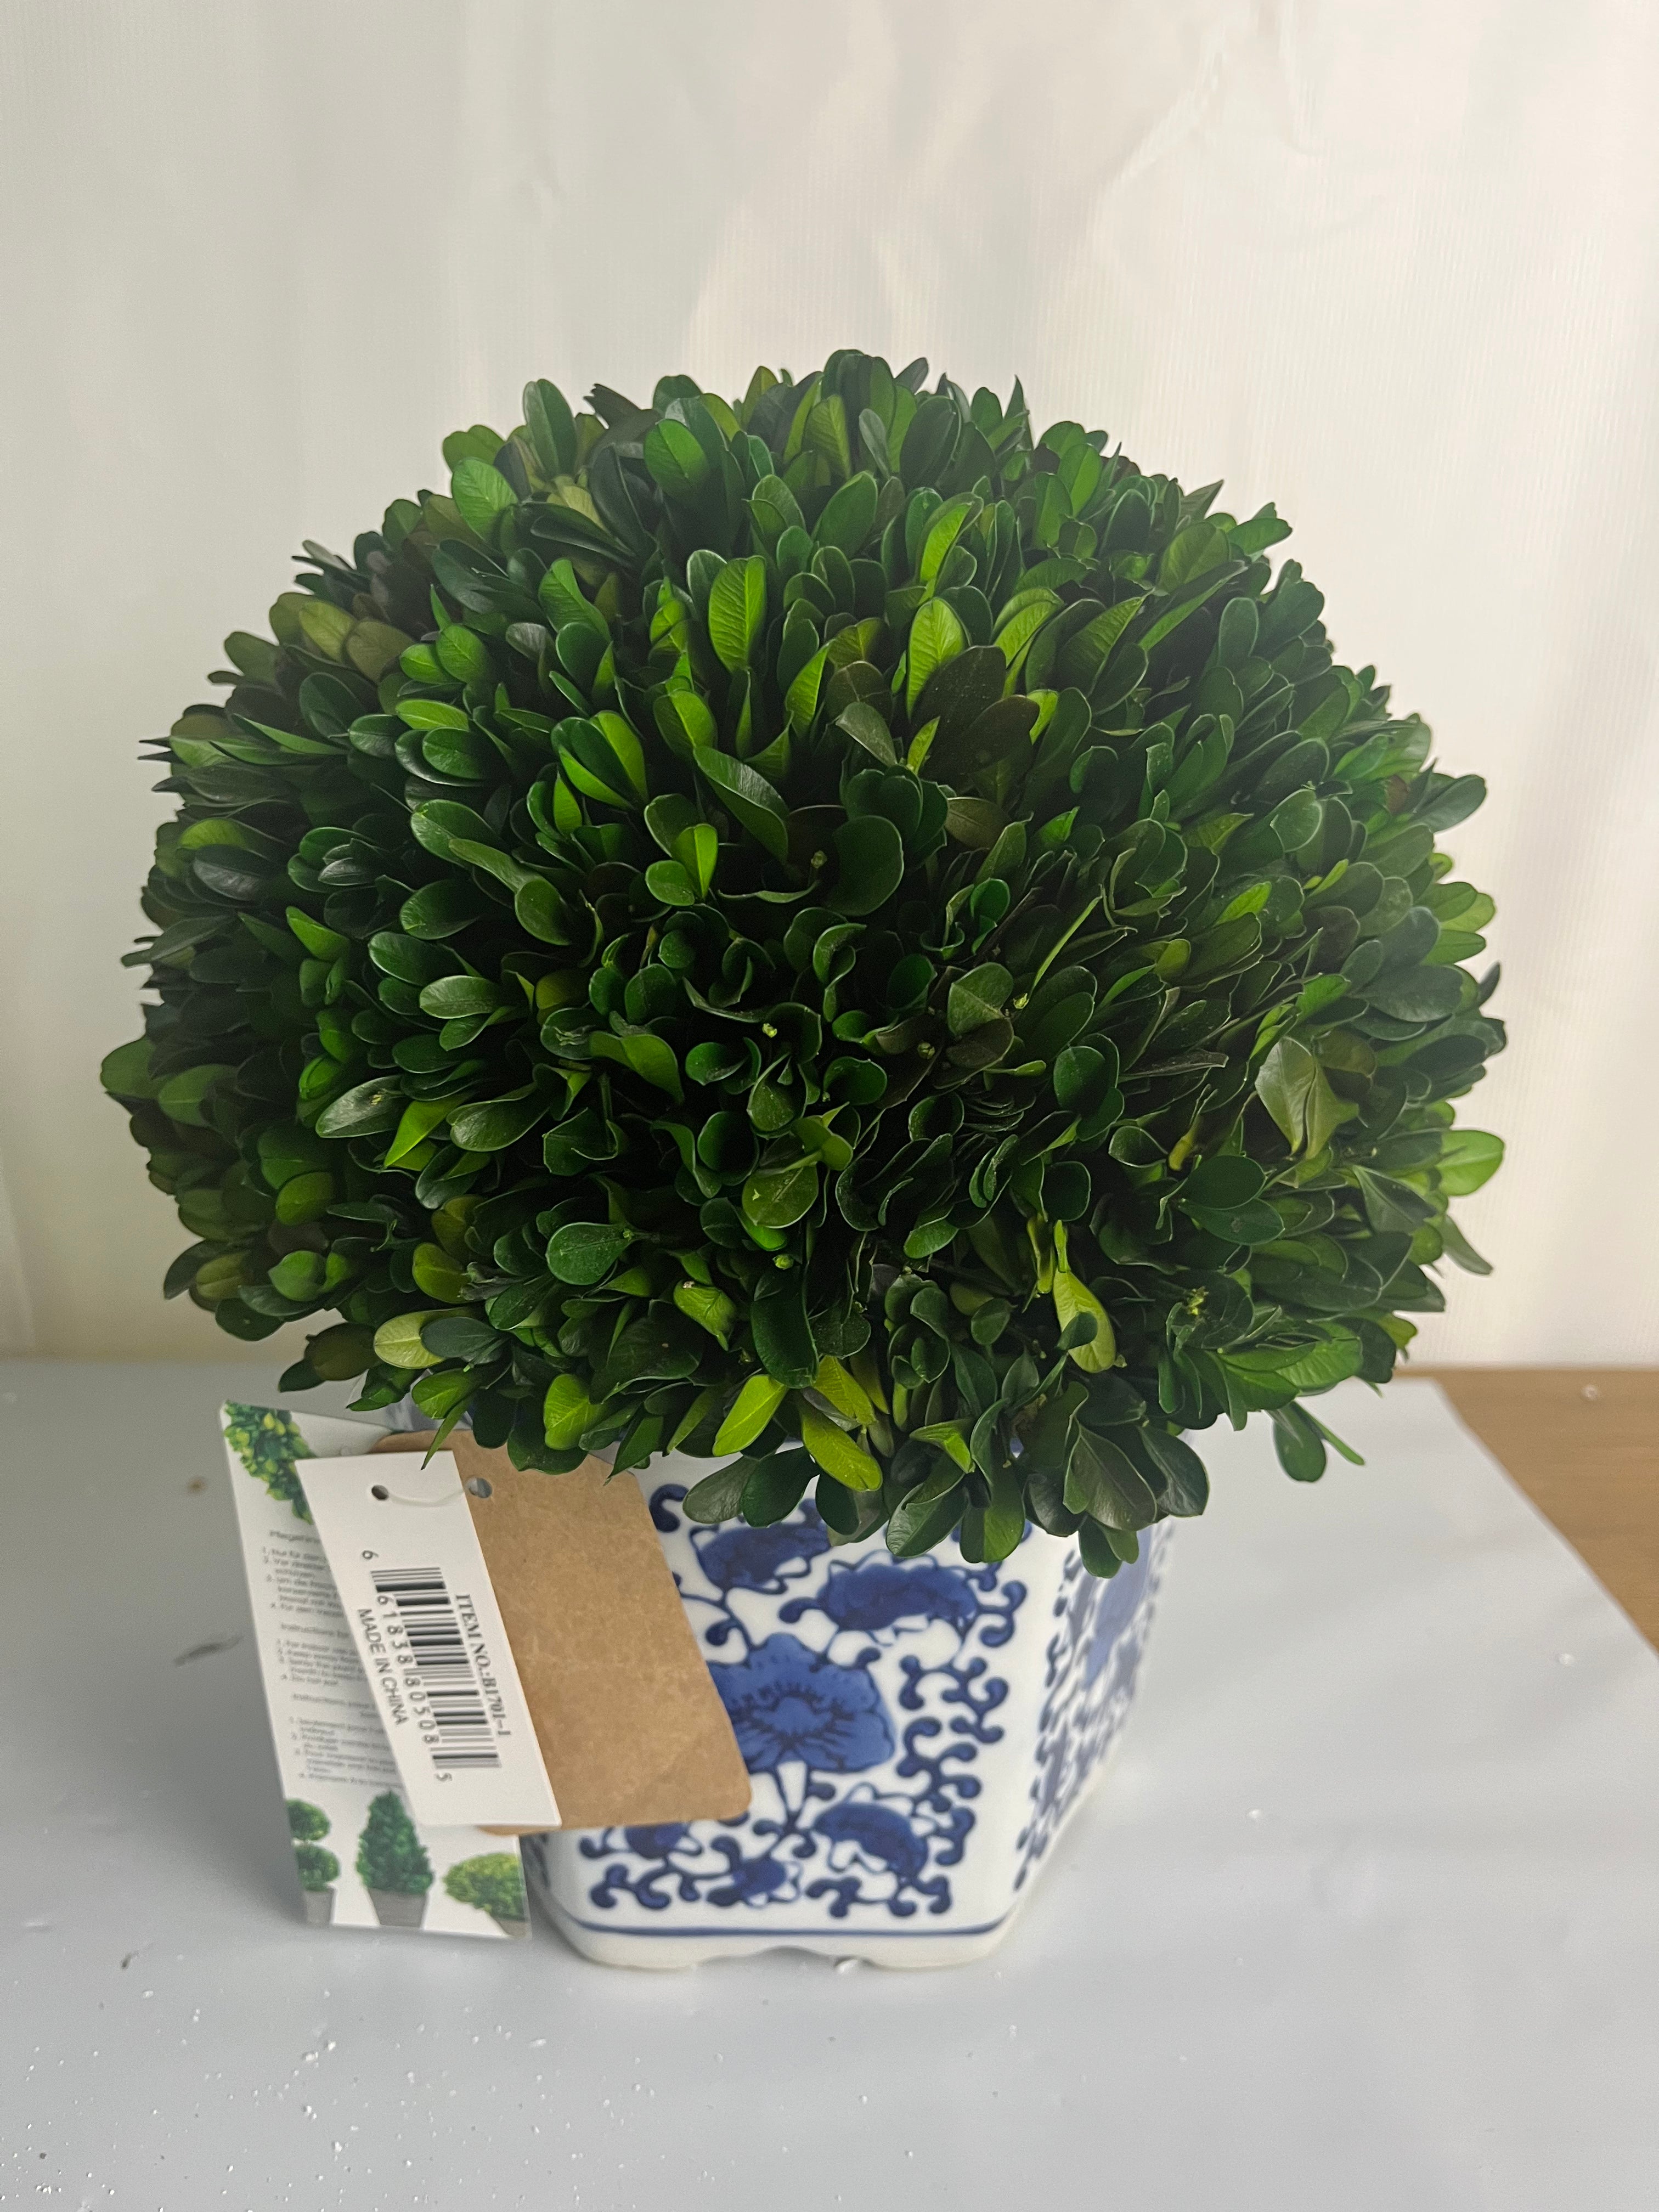 Galt International Preserved Natural Boxwood in Ceramic Pot - Plant and Table Centerpiece - Stunning Greenery and Plant Decor for Home - Blue & White 11"